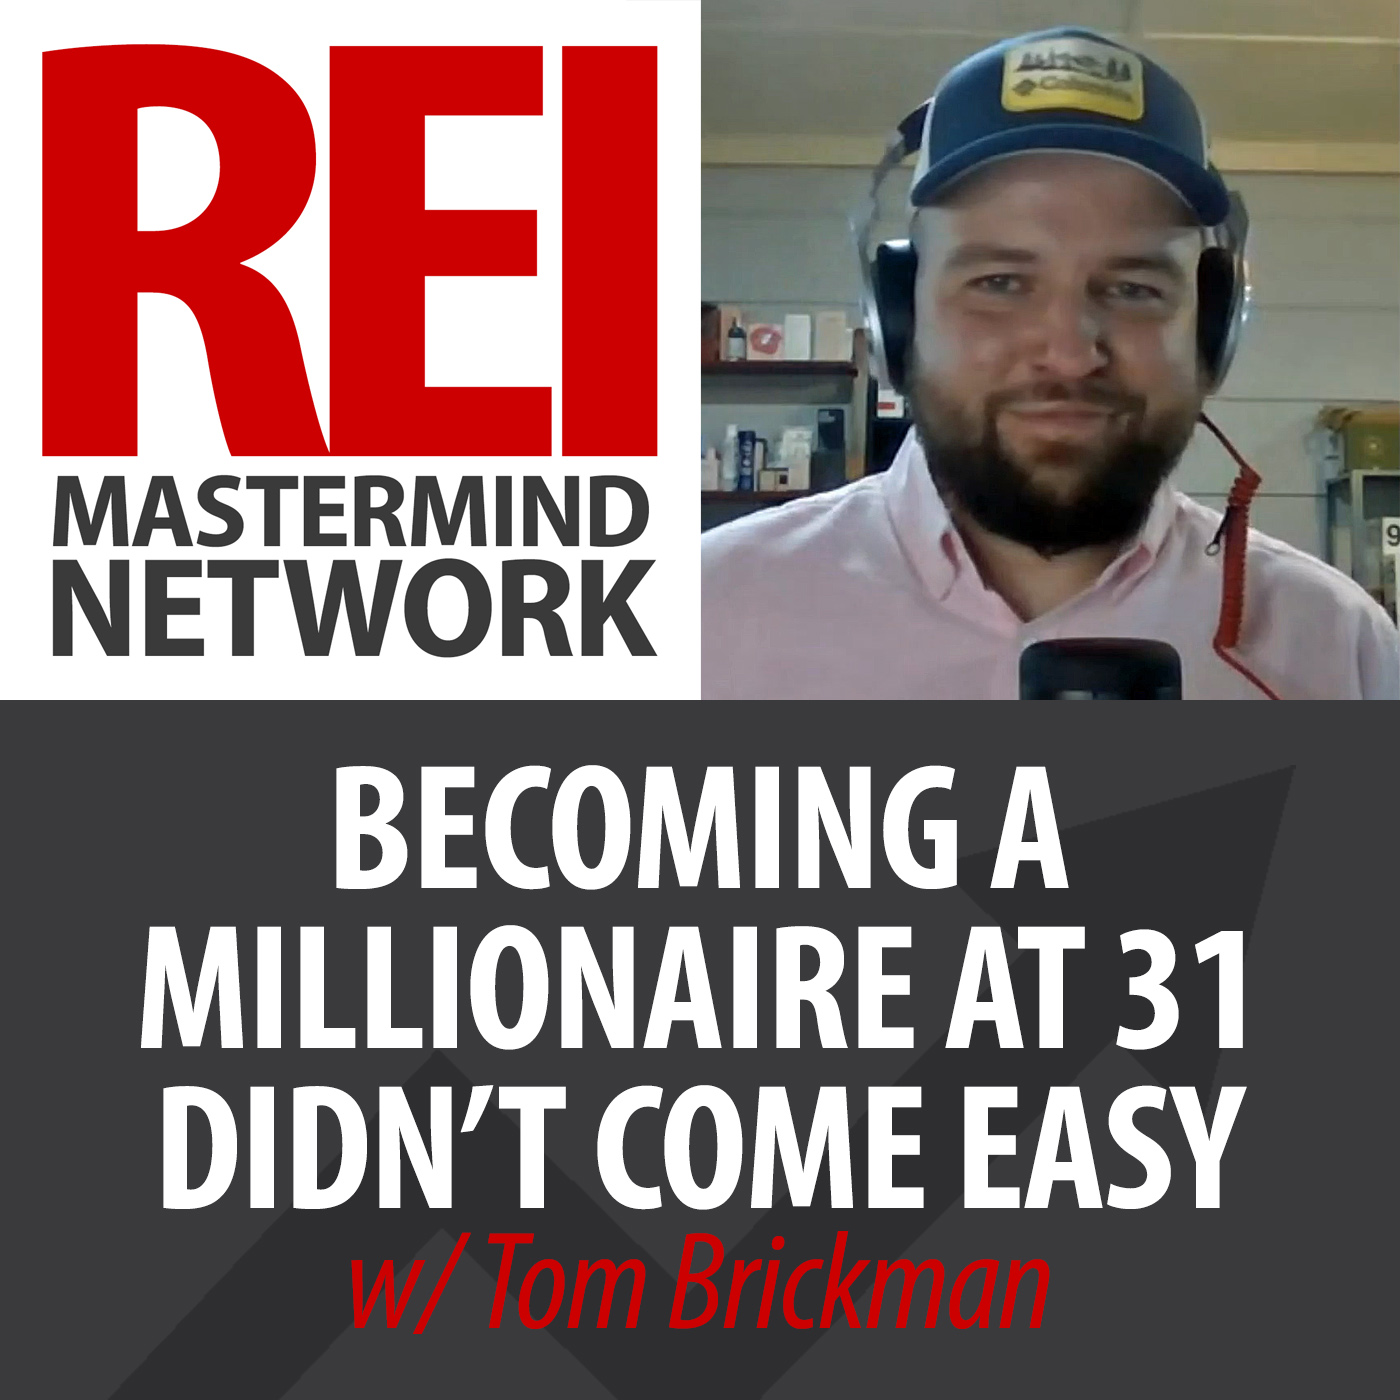 Becoming a Millionaire at 31 Didn't Come Easy with Tom Brickman